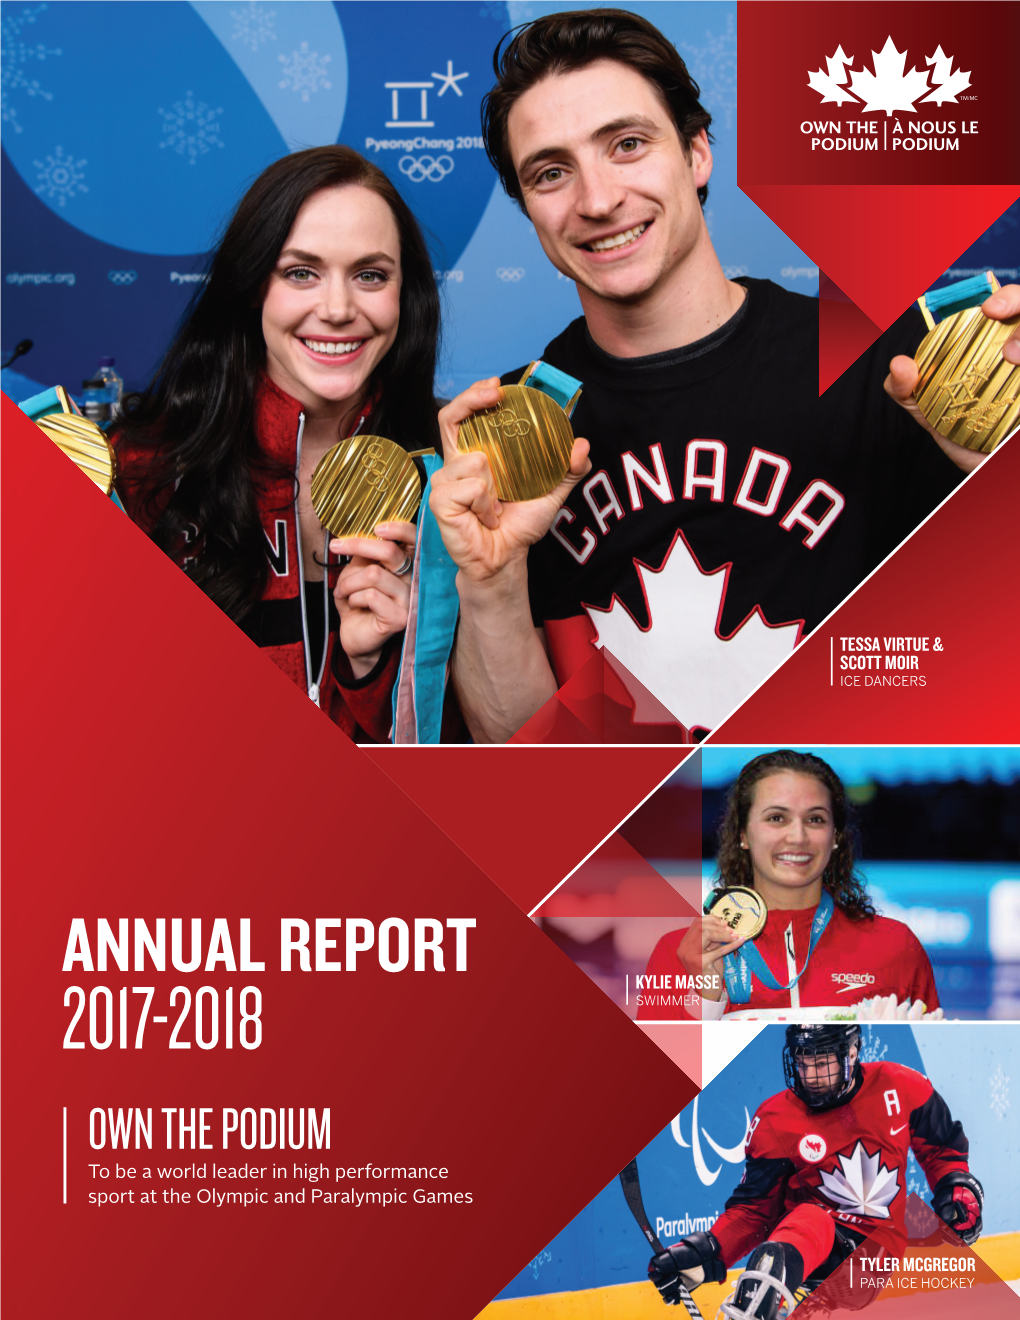 ANNUAL REPORT KYLIE MASSE 2017-2018 SWIMMER OWN the PODIUM to Be a World Leader in High Performance Sport at the Olympic and Paralympic Games